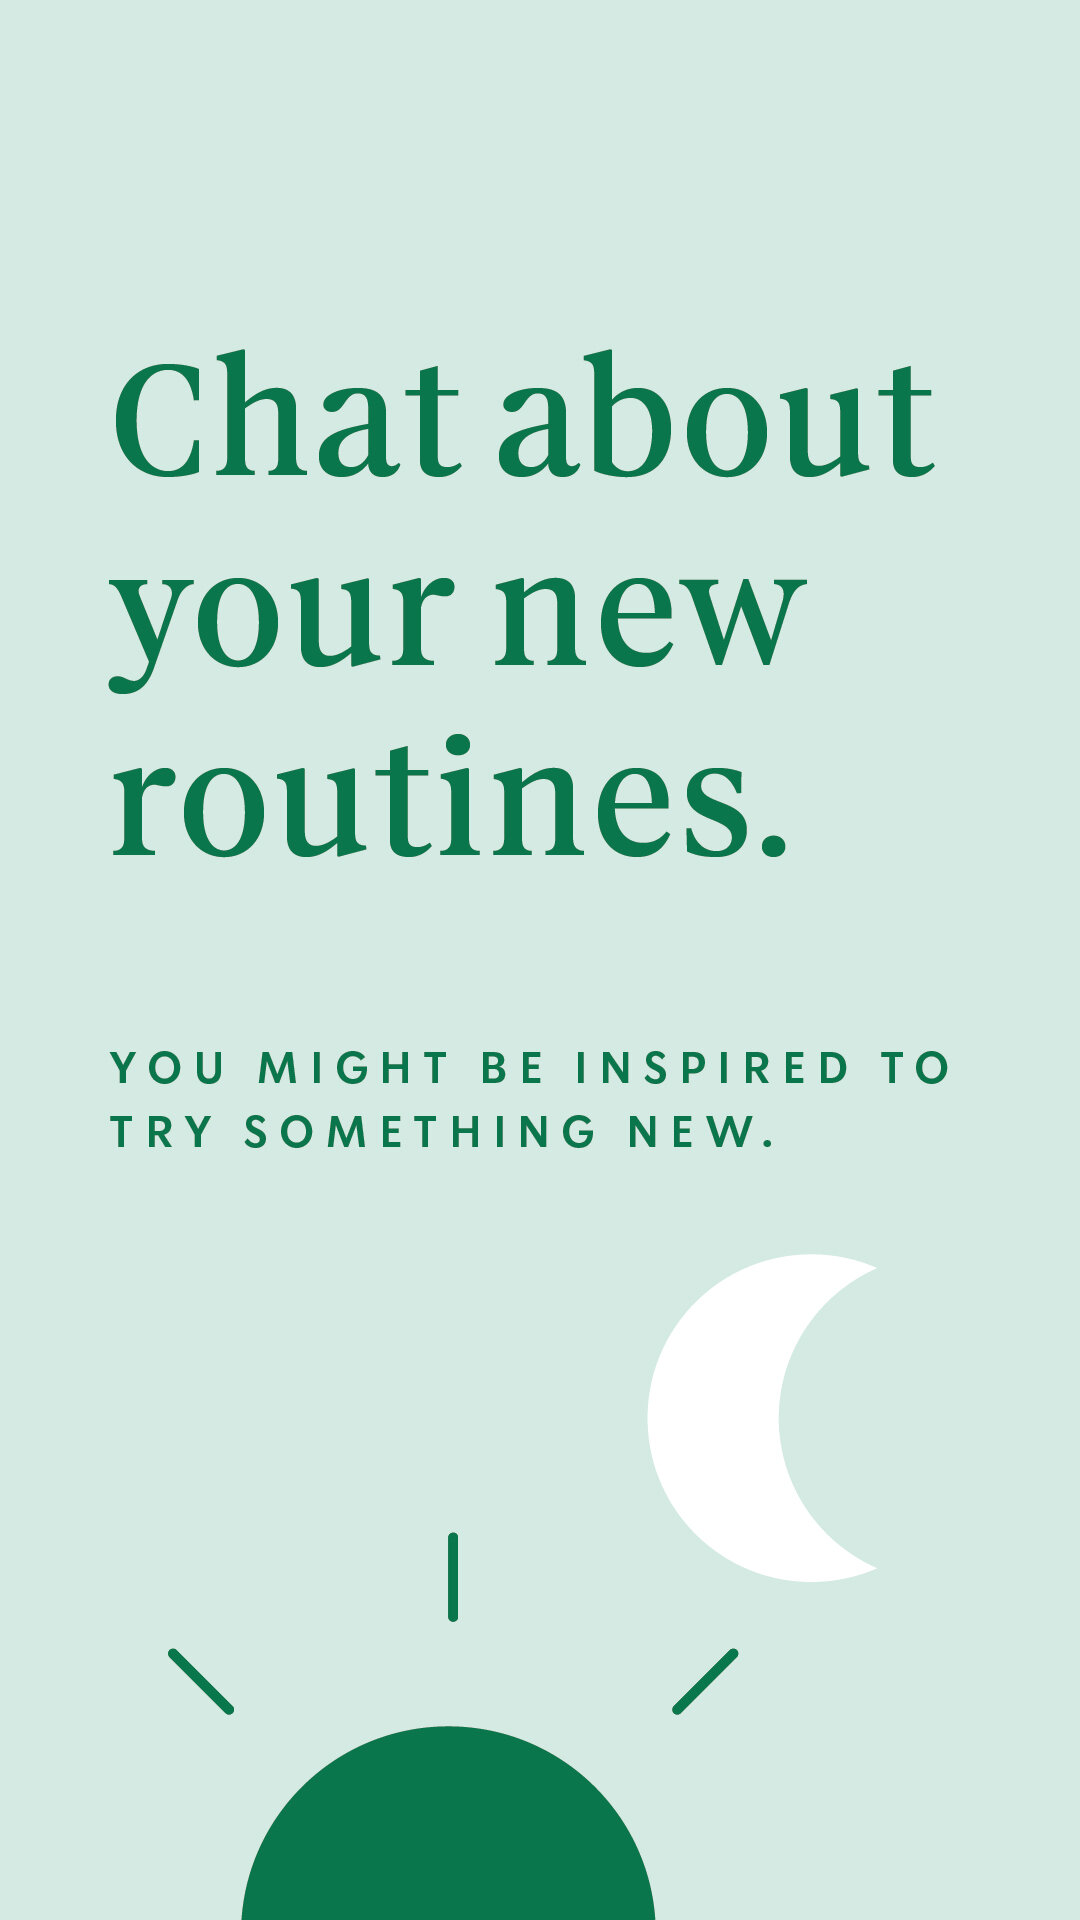 Story Kit_Frame 3 - Then, chat about your new routines.jpg